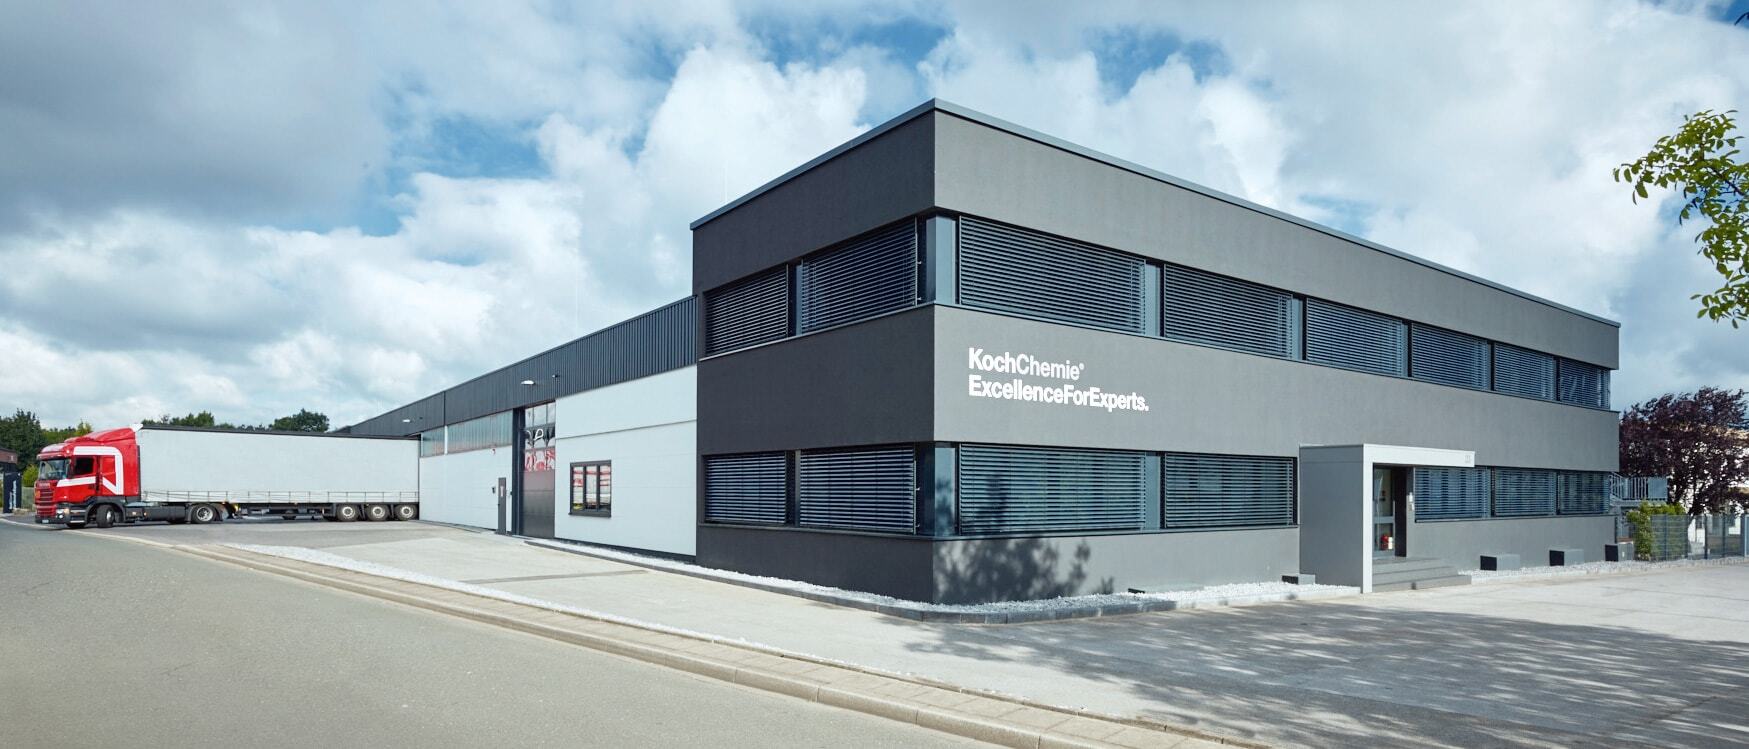 Company building in Unna, Germany